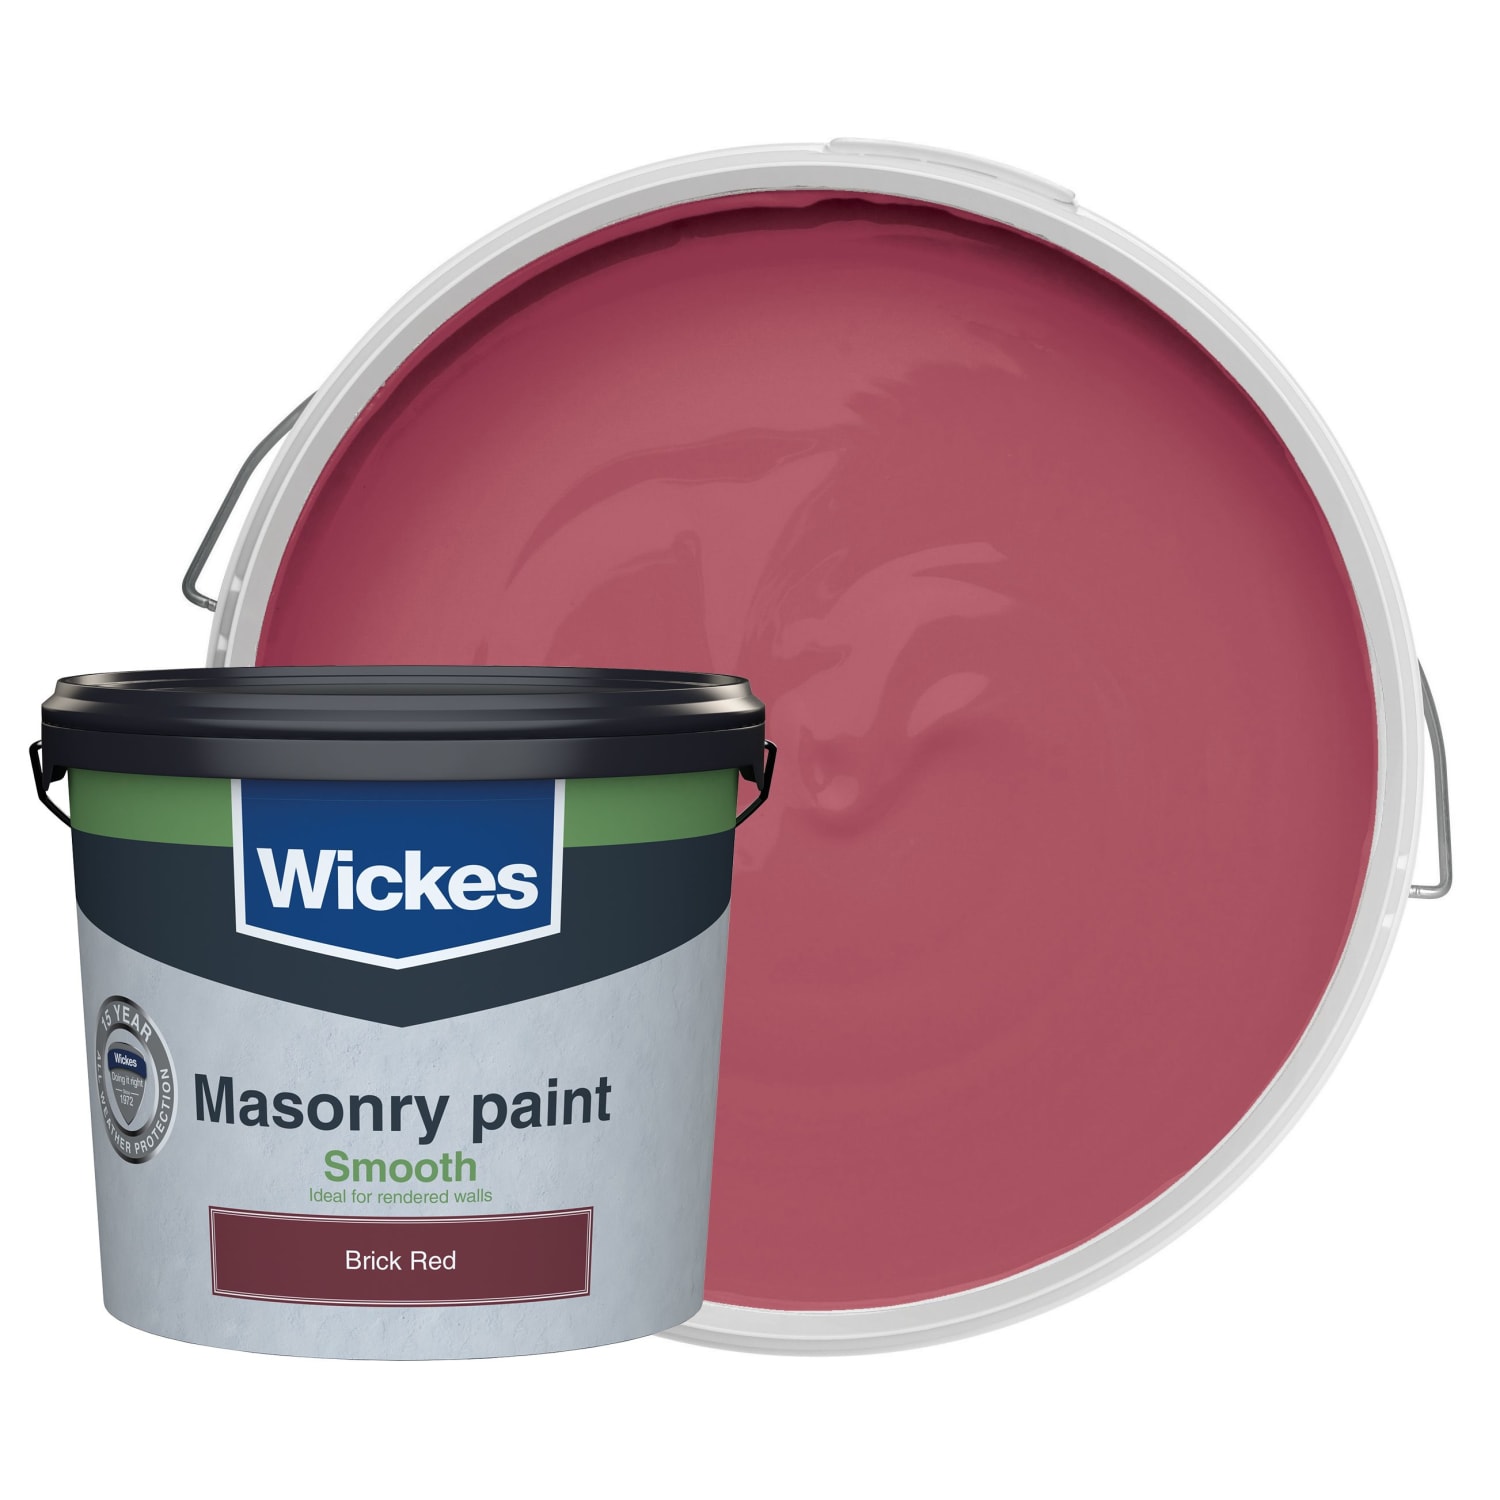 What is masonry paint?